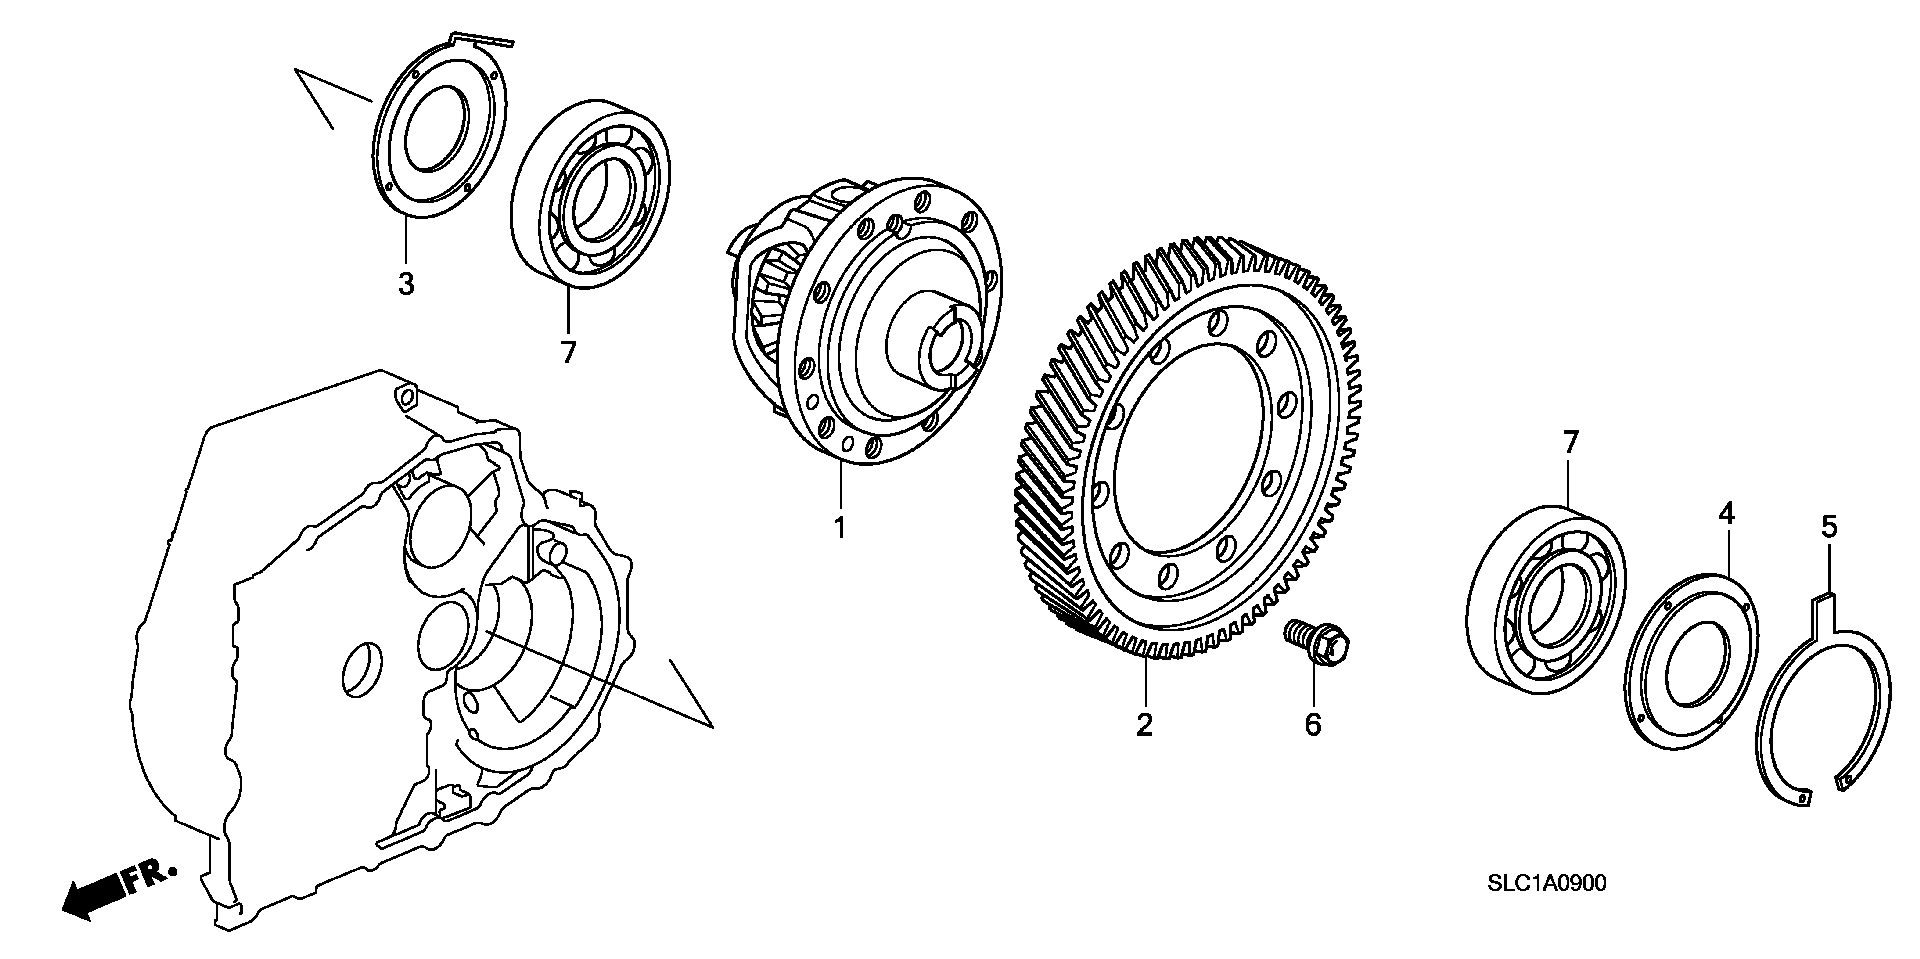 DIFFERENTIAL(2WD)